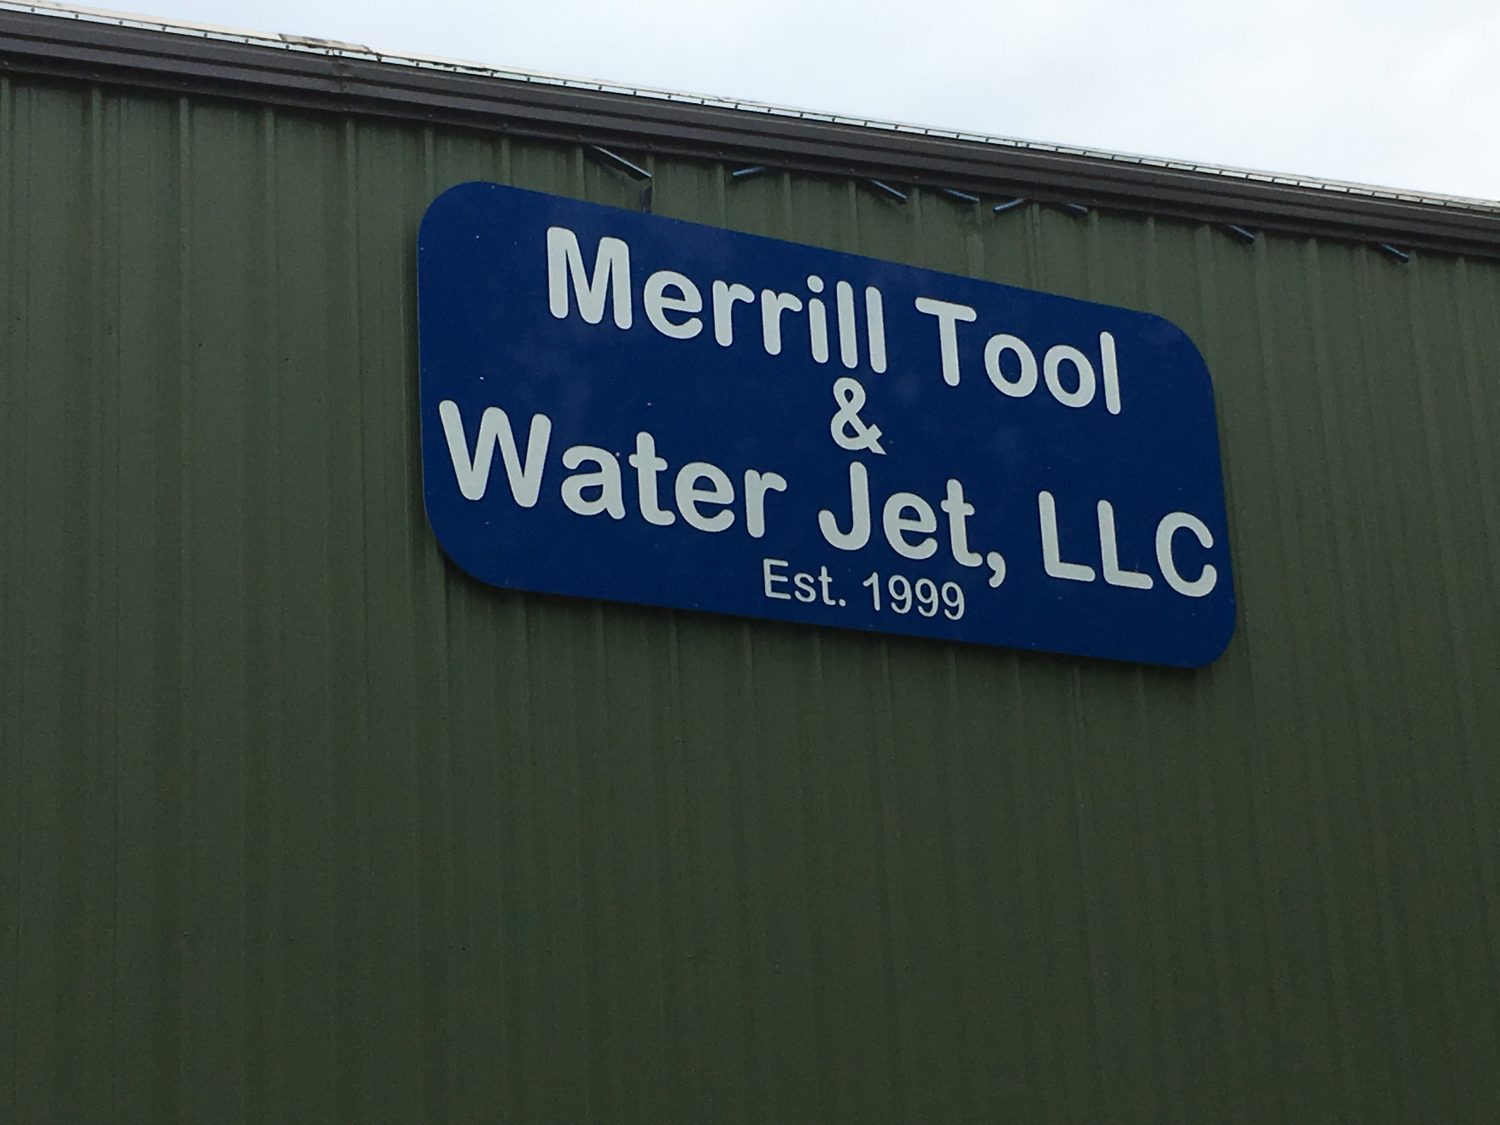 Merrill Tool & Water Jet named Mid-Sized Business of the Year